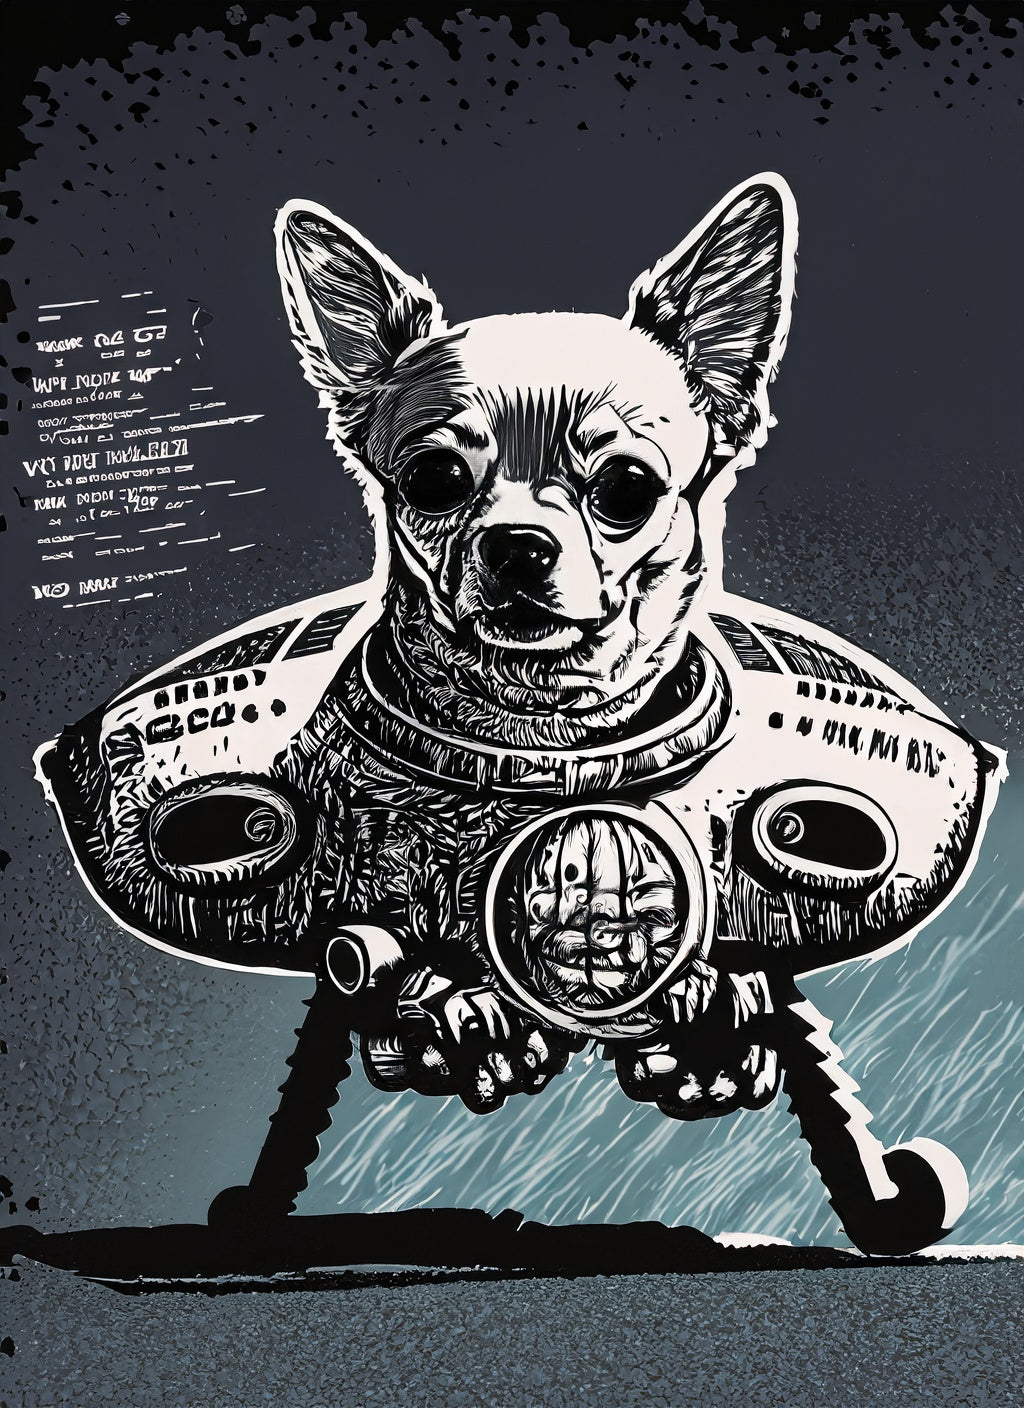 A chihuahua flying a spaceship representaing an agile perfomance based adverting option